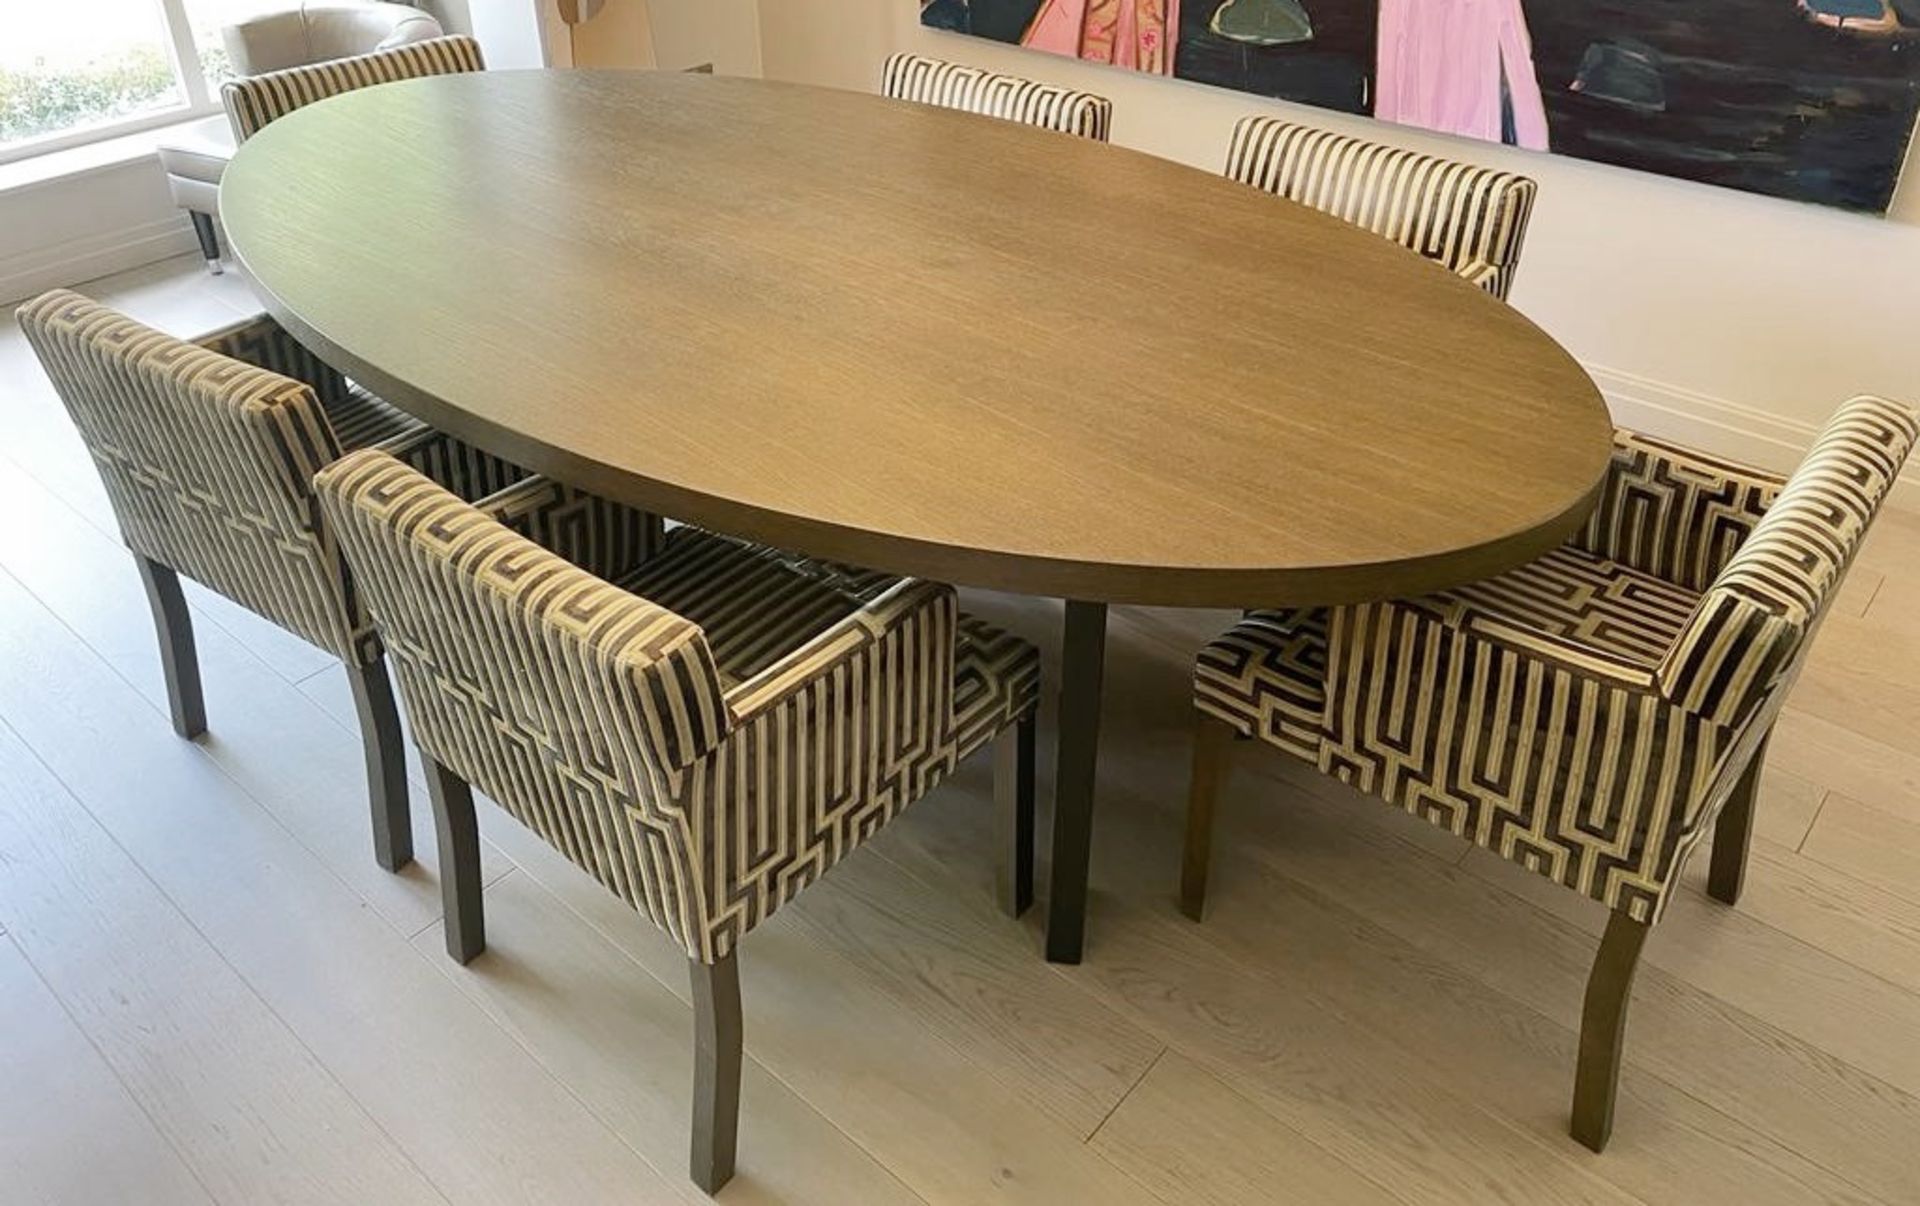 1 x Oval Dining Table With A Limed Oak Finish And Metal Legs